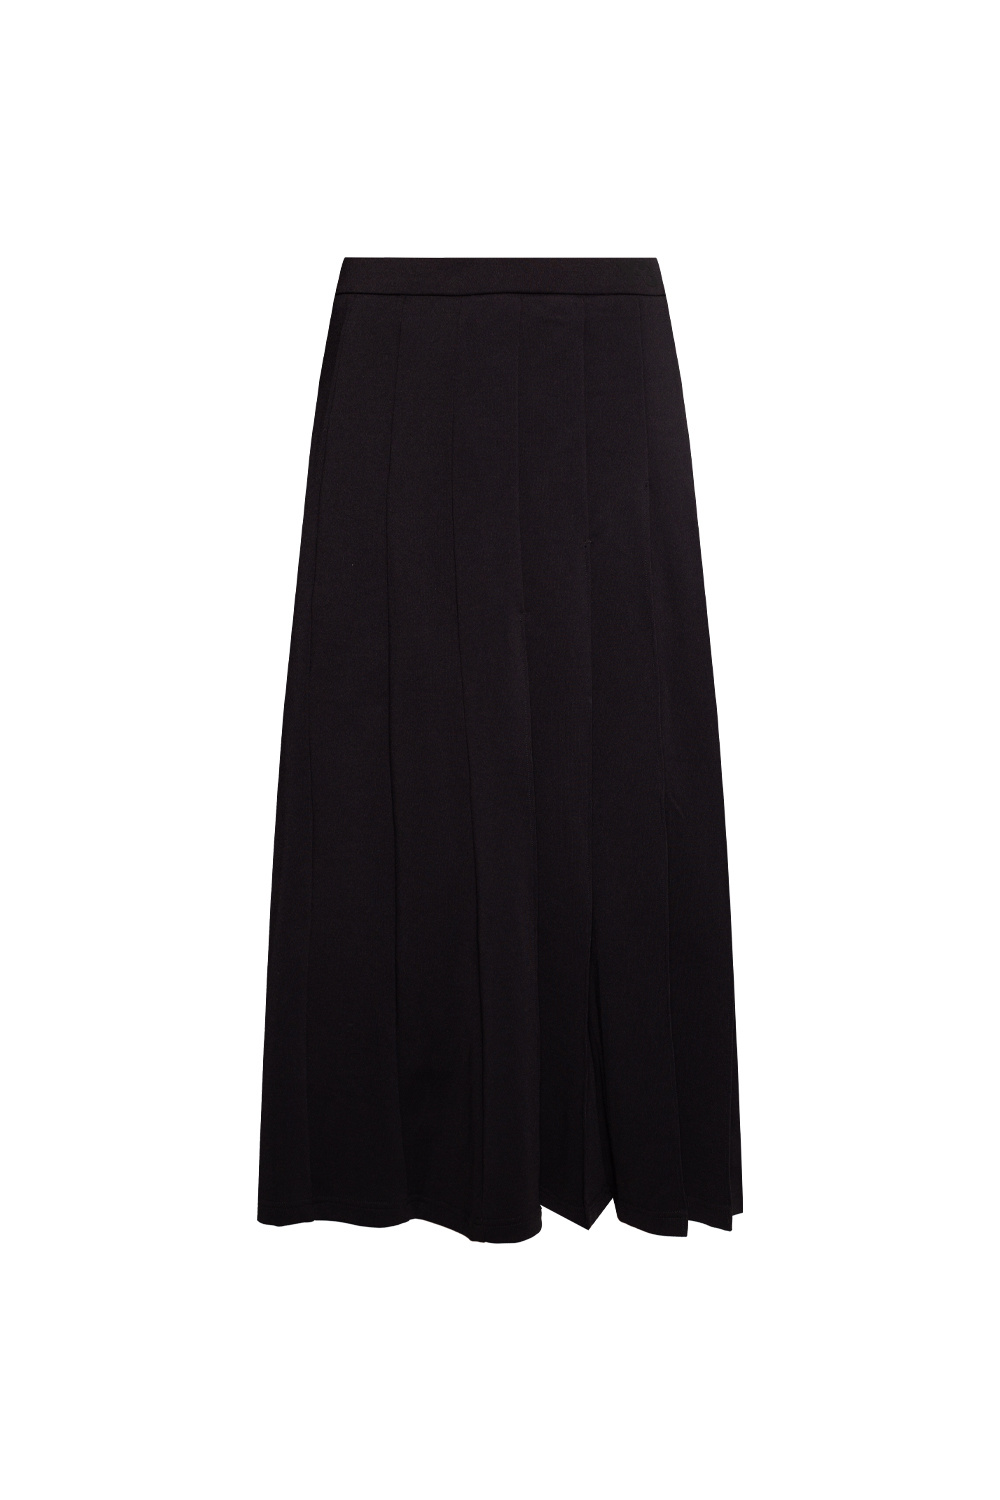 Skirt with stitching details Add to wish list